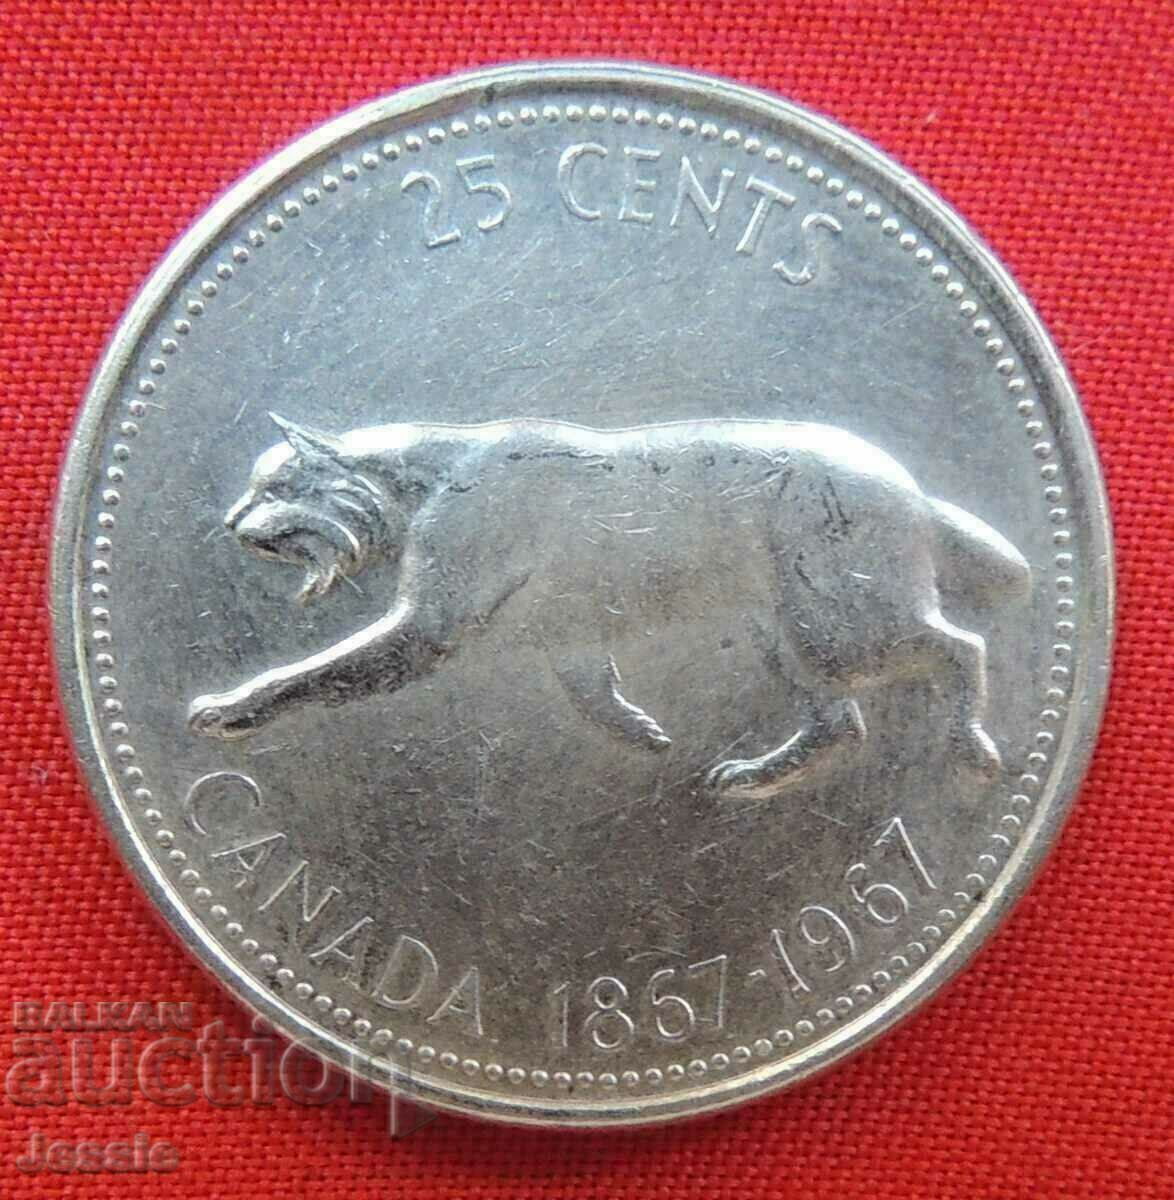 25 cents 1967 Canada